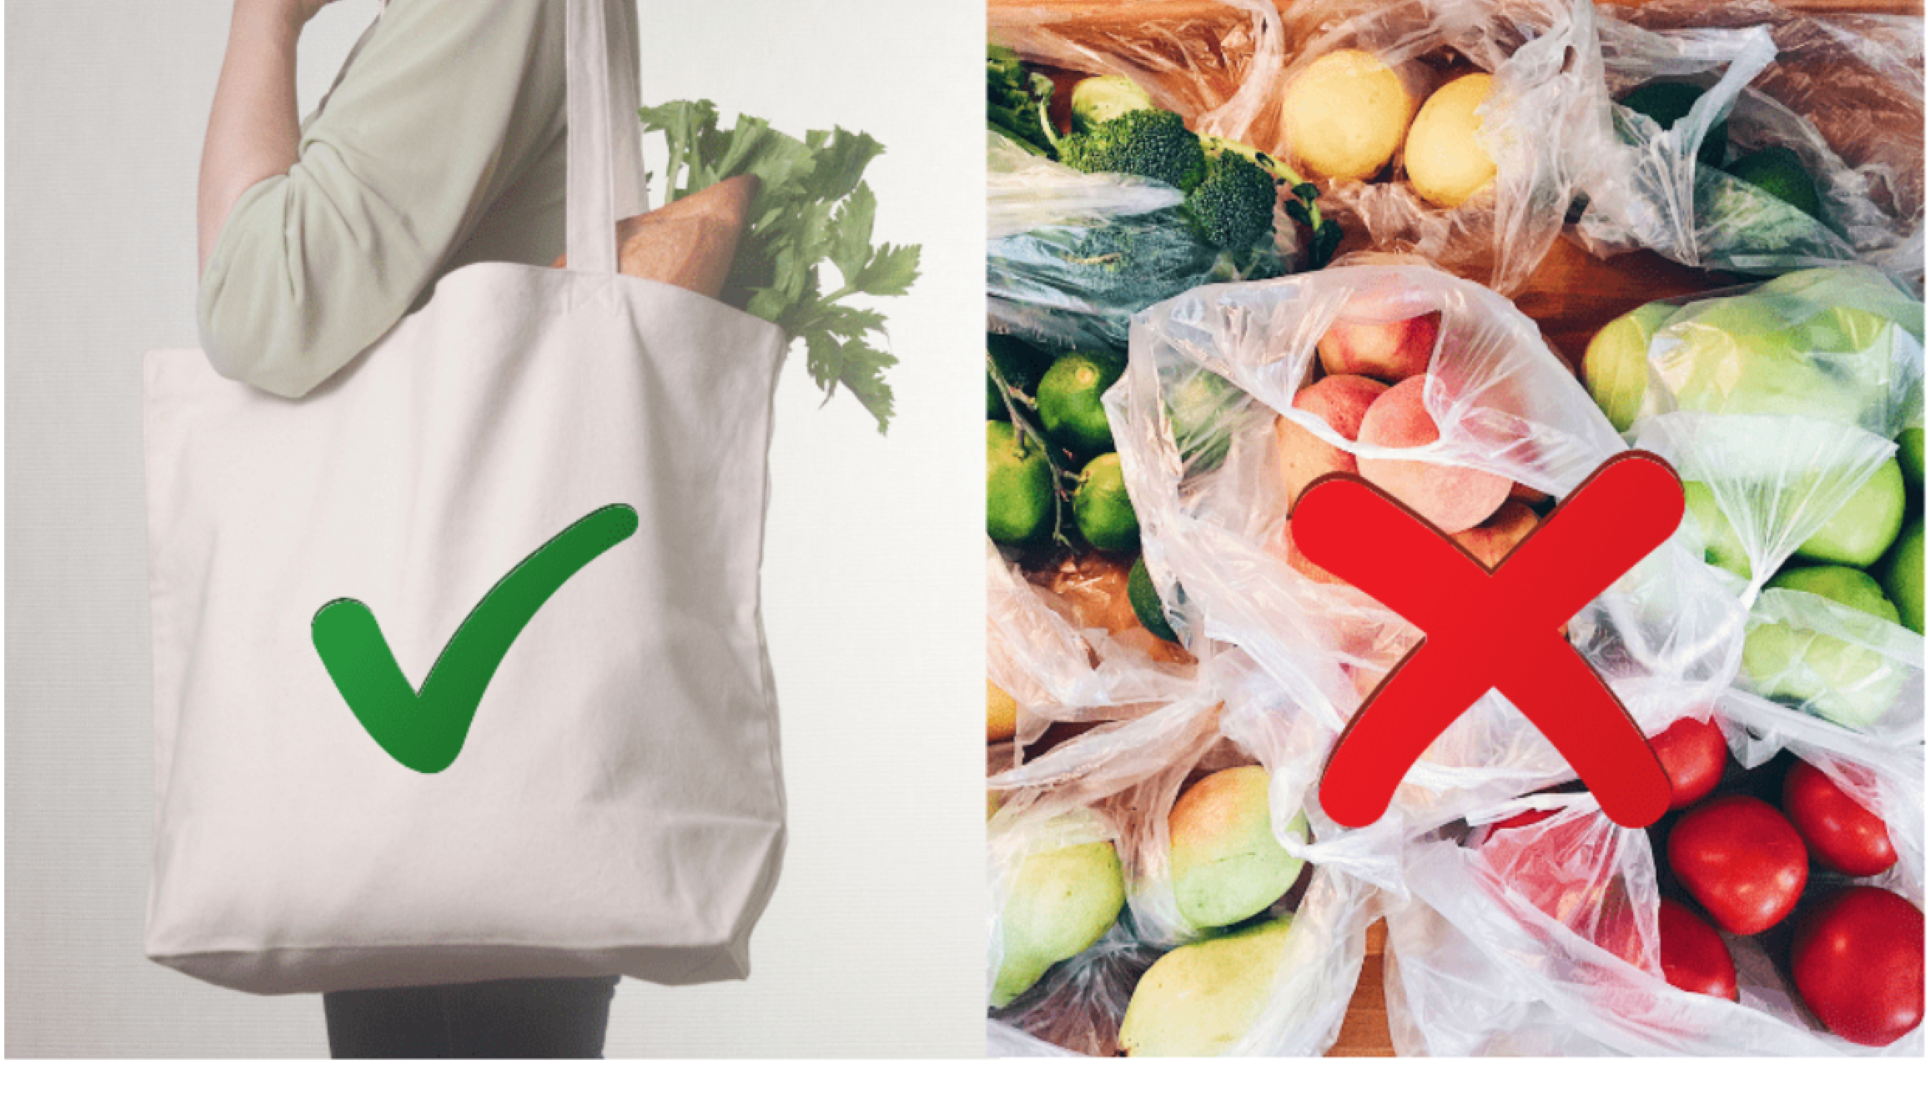 New Zealand Bans Plastic Bags From Tomorrow